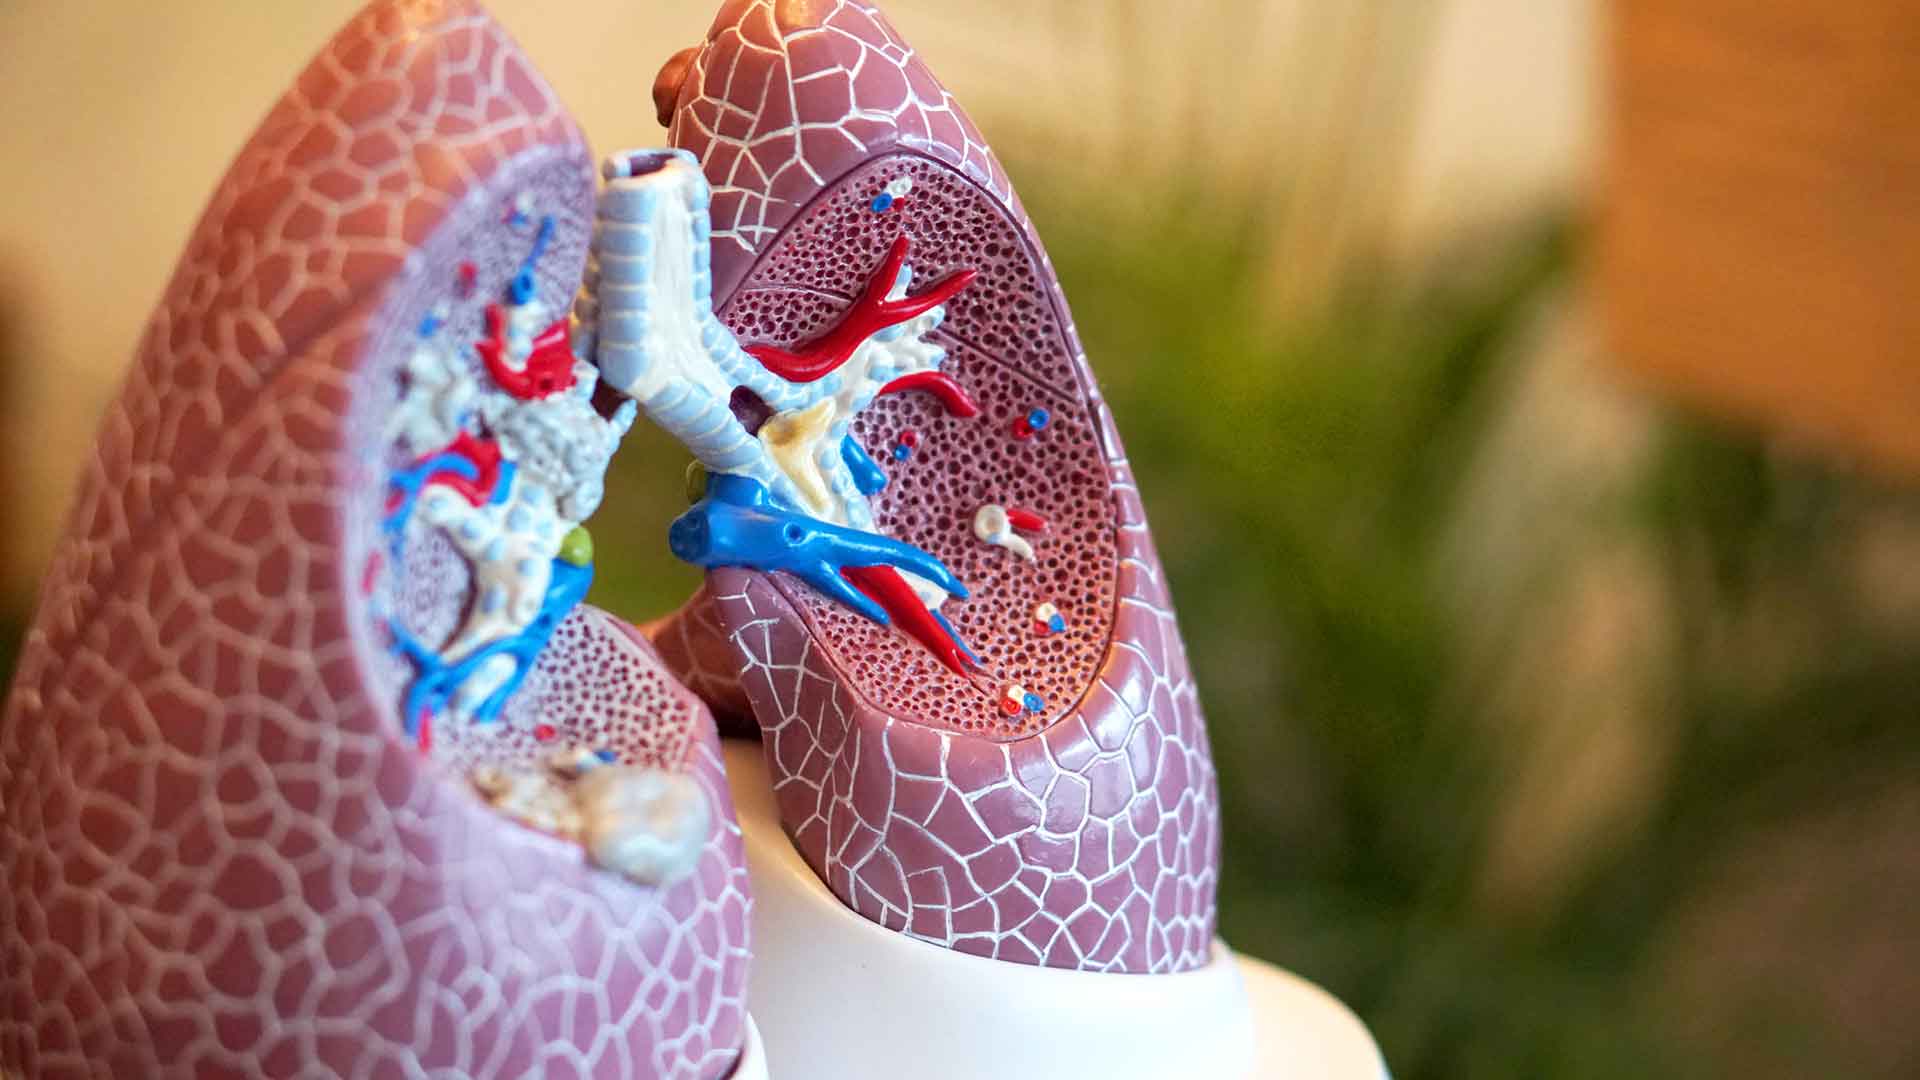 A plastic cross-section model of human lungs